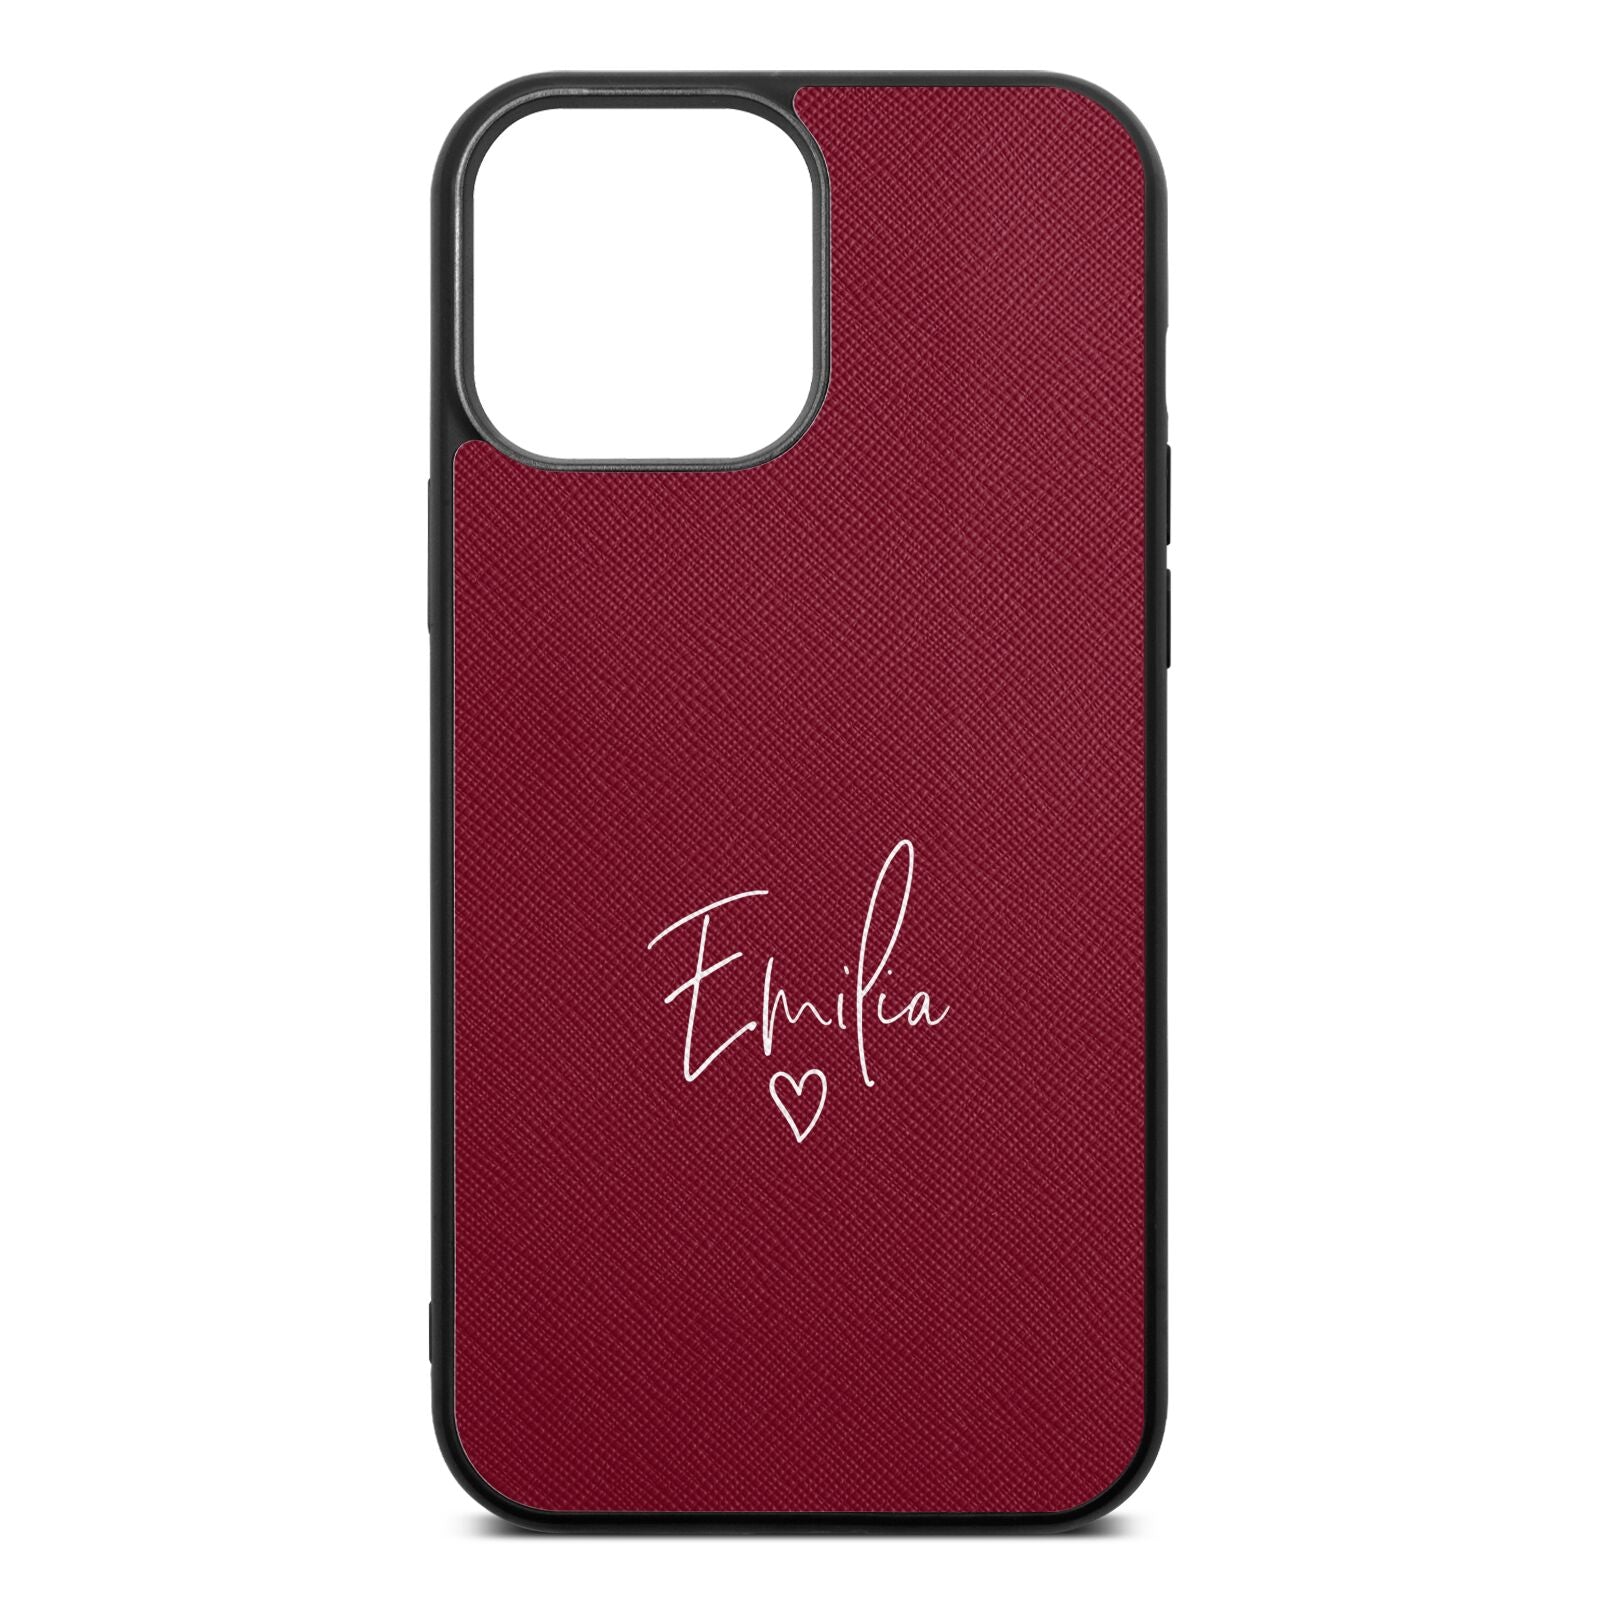 White Handwritten Name Transparent Wine Red Saffiano Leather iPhone 13 Pro Max Case